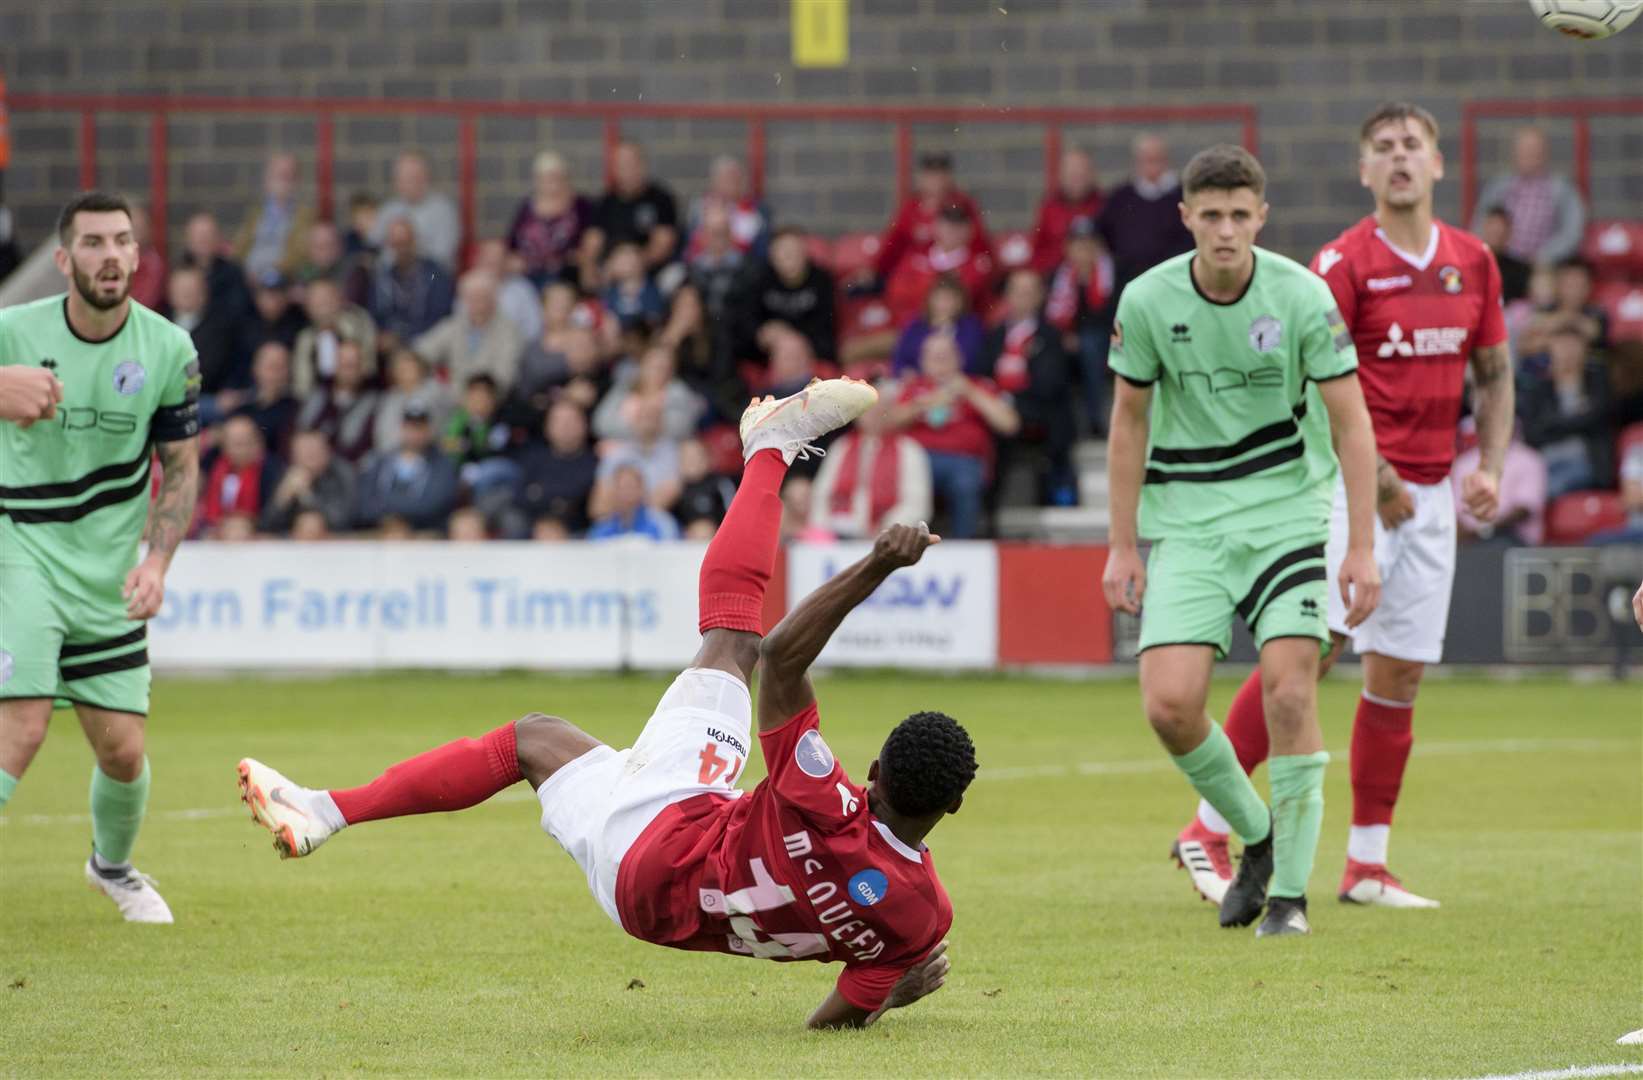 Darren McQueen goes for the spectacular against Gateshead Picture: Andy Payton